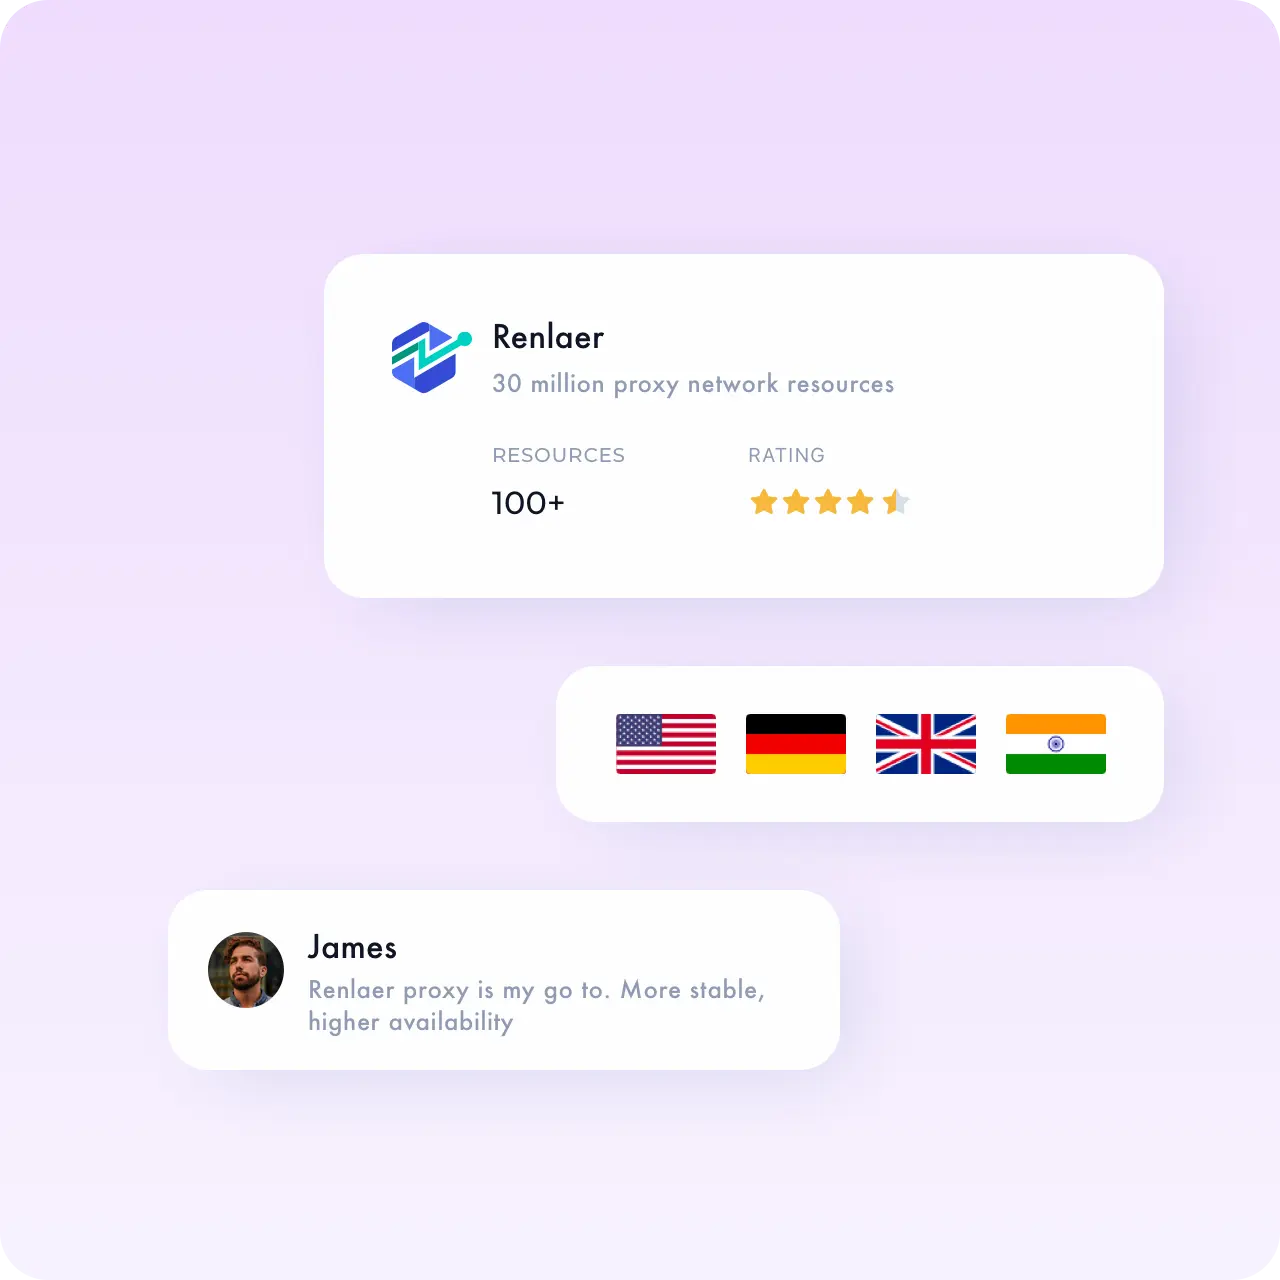 User Center Dashboard Overview